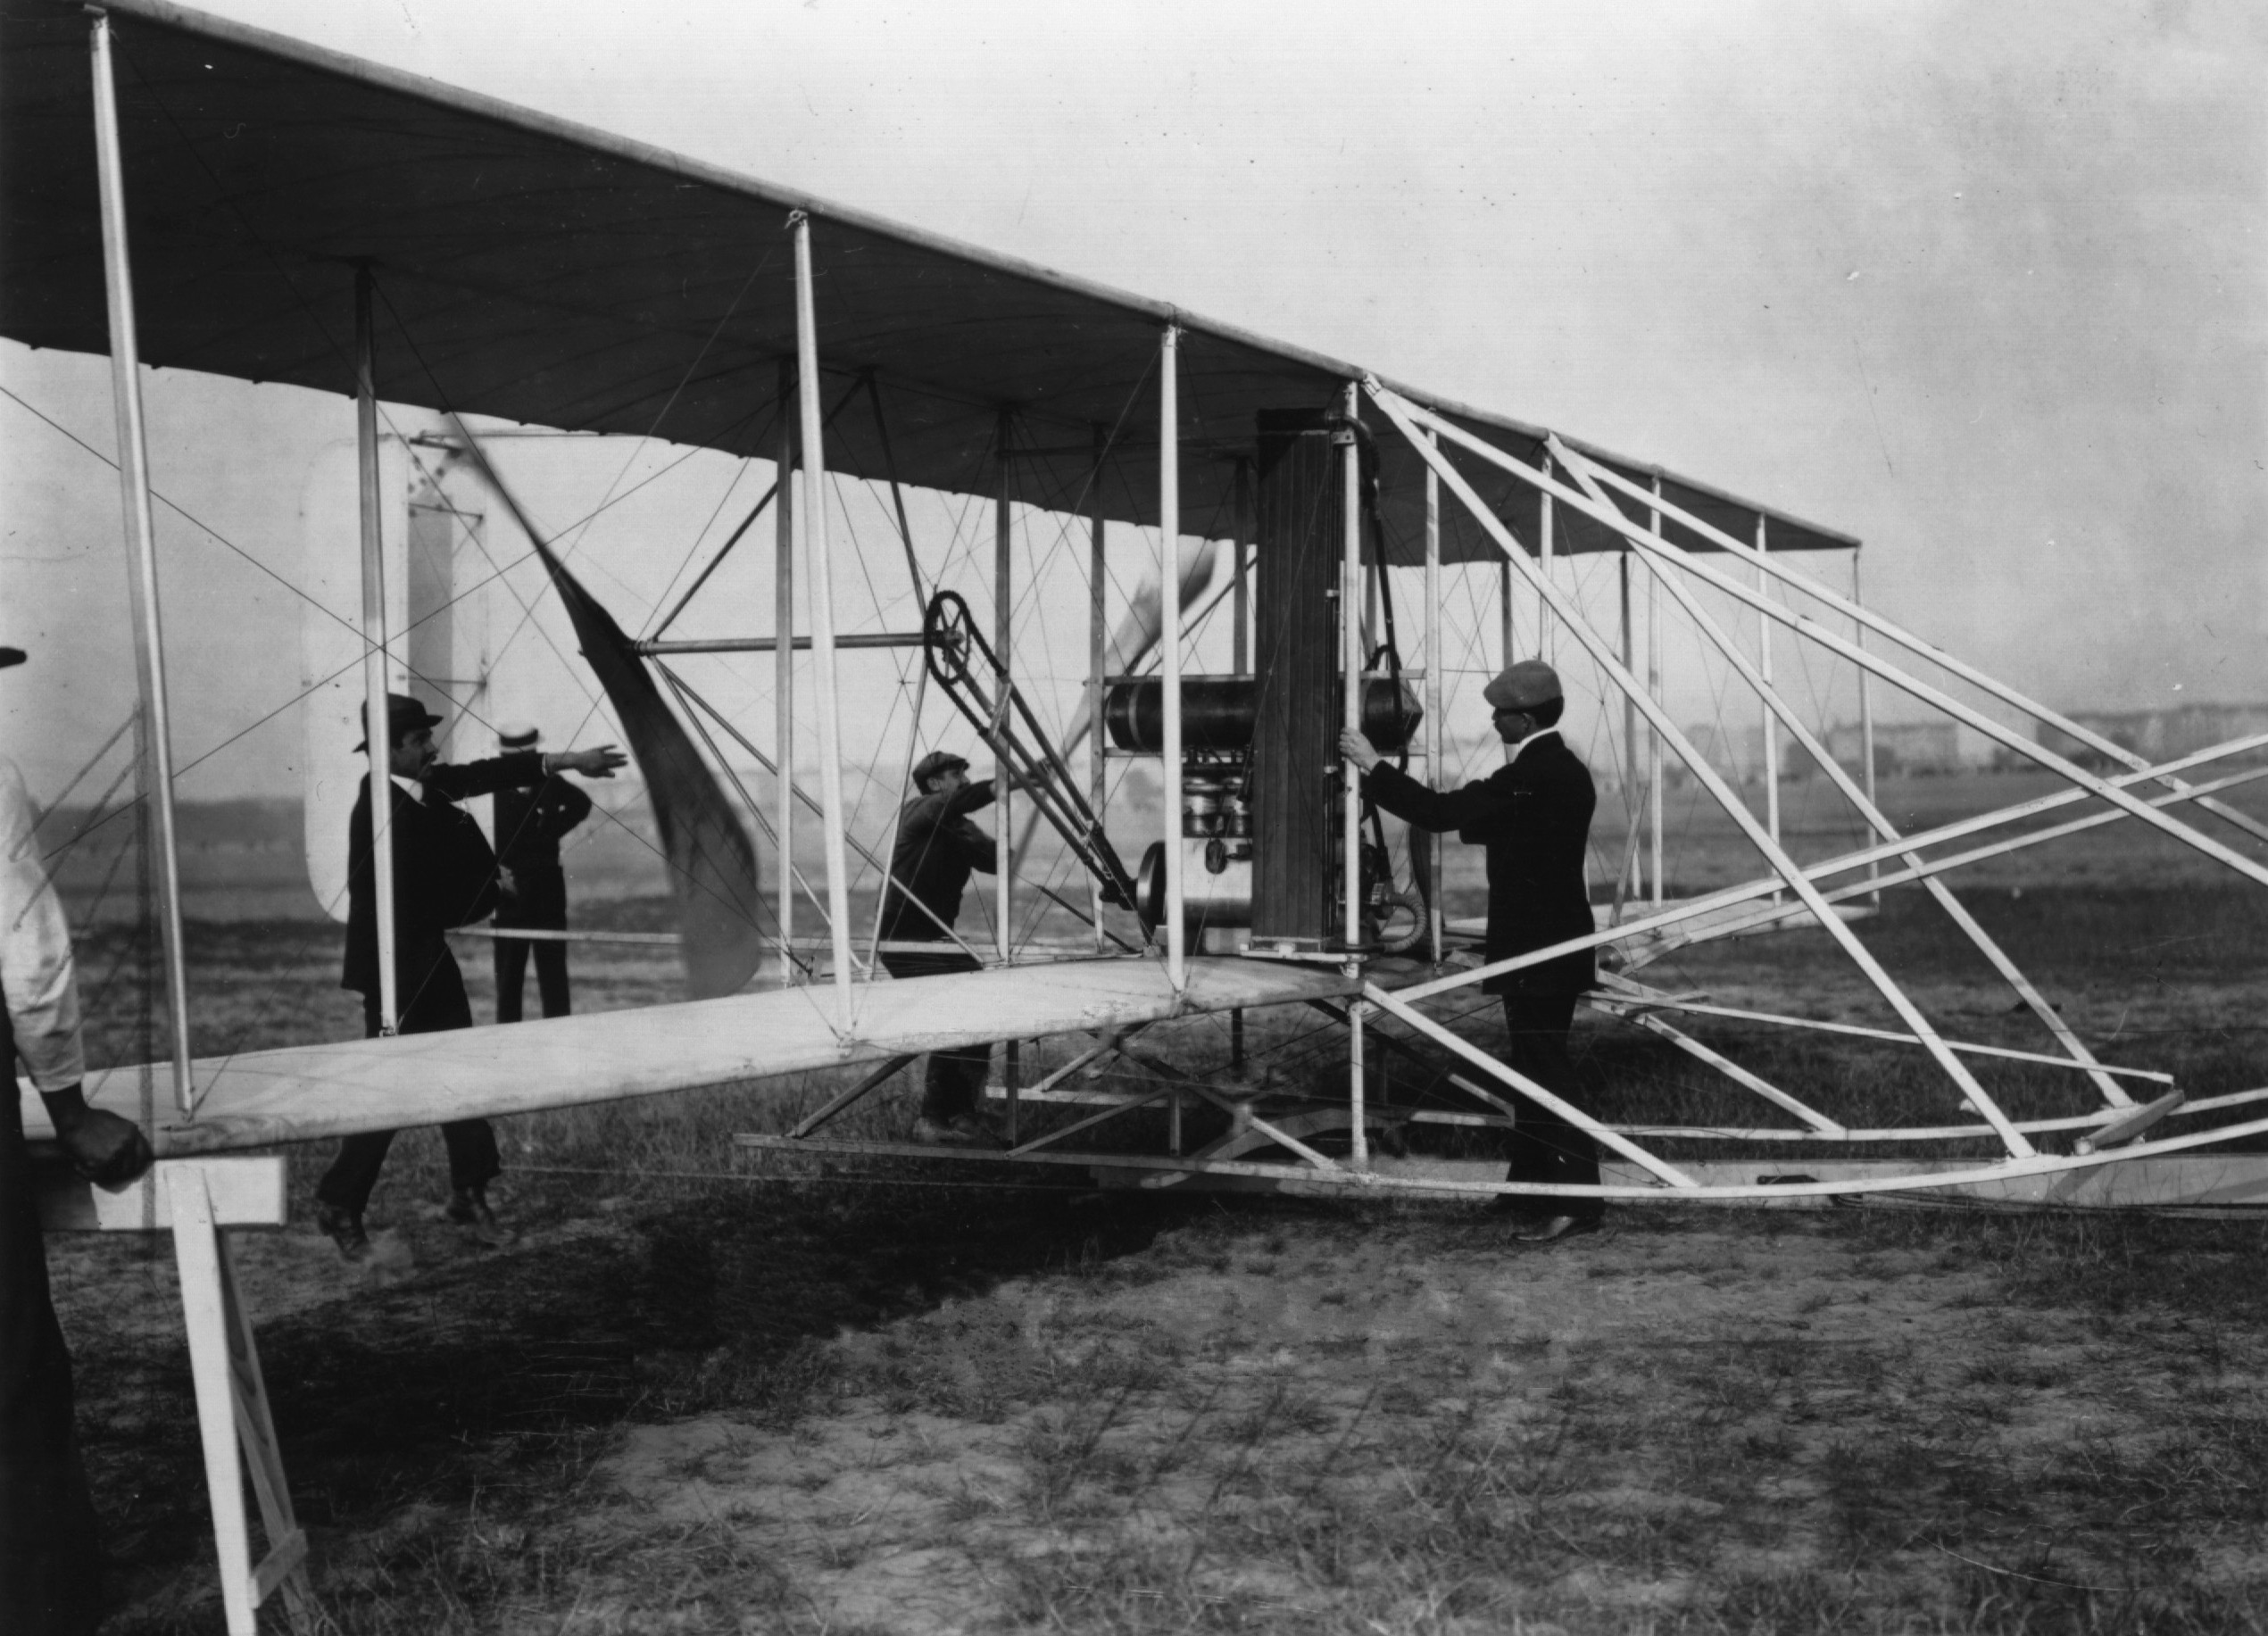 Wright Flyer aircraft